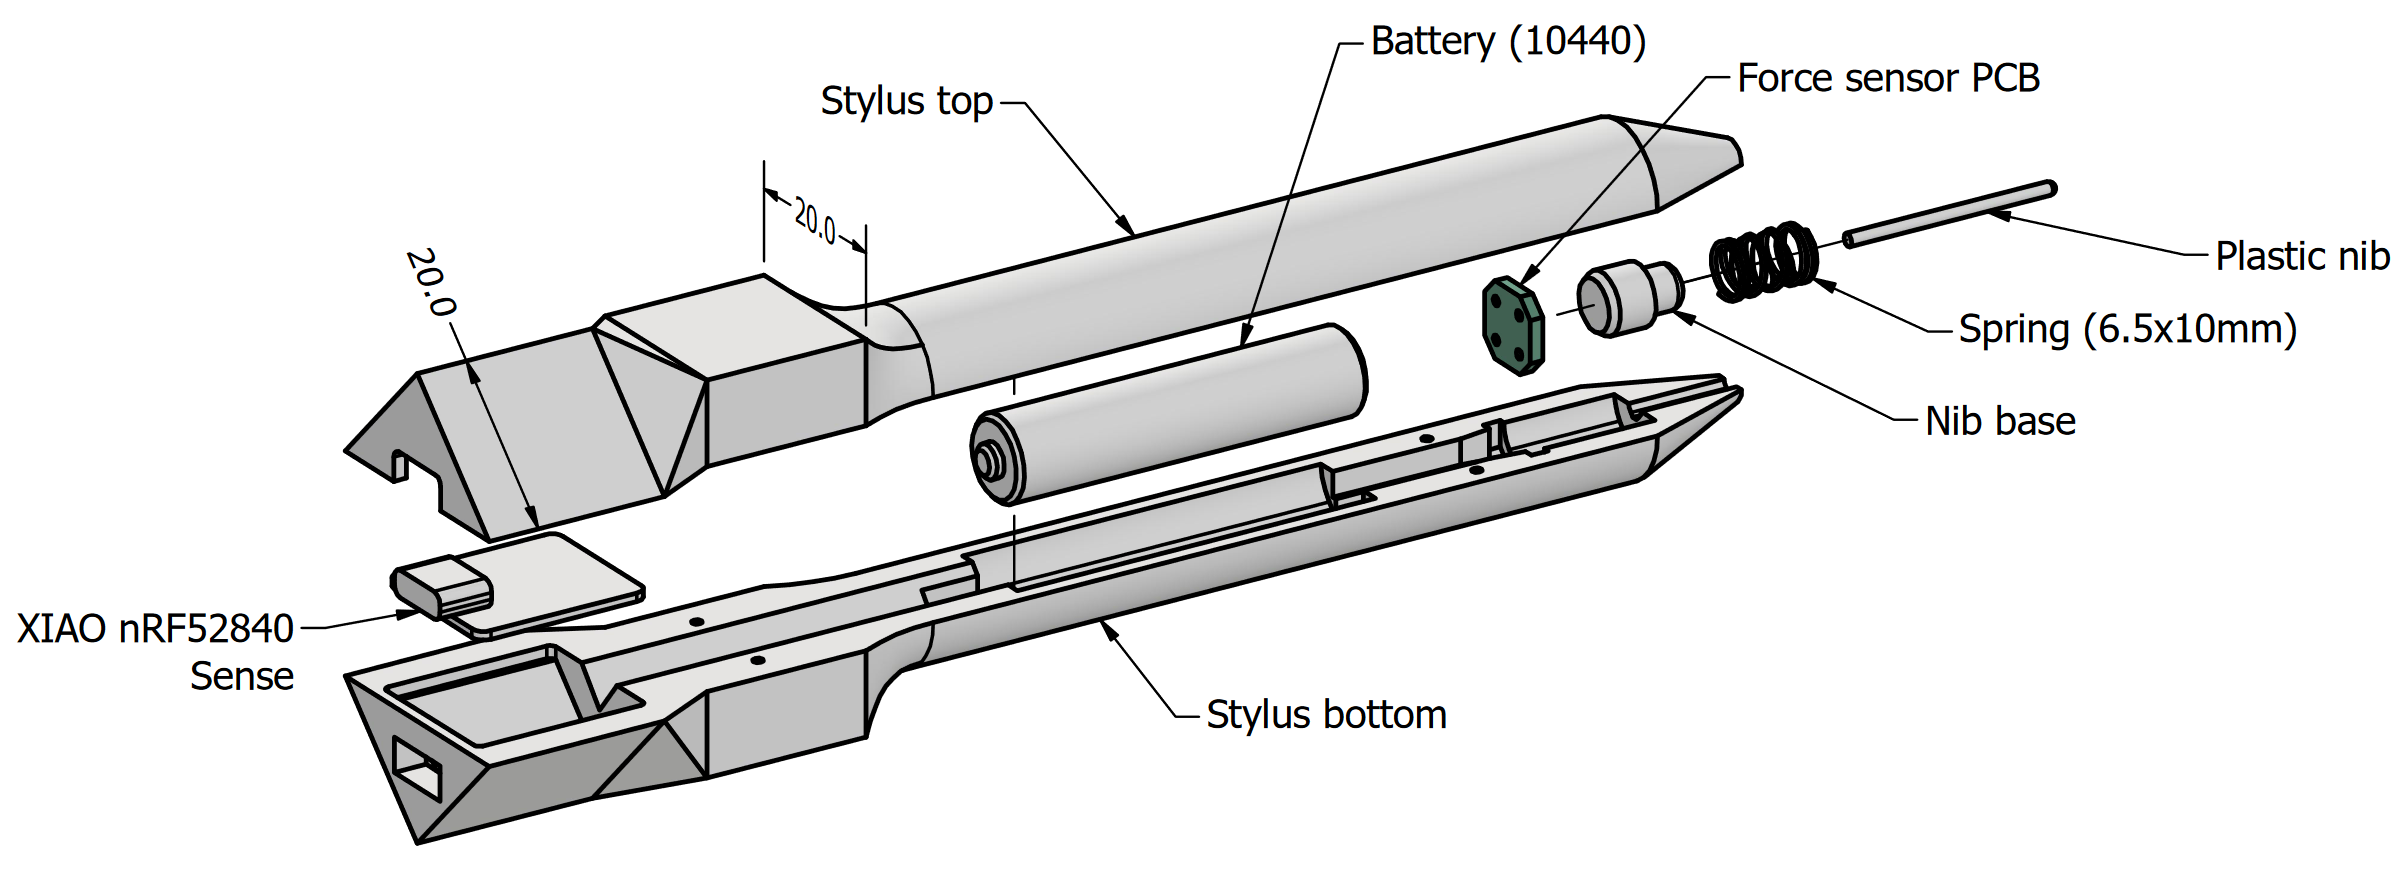 CAD drawing showing the hardware design of the stylus